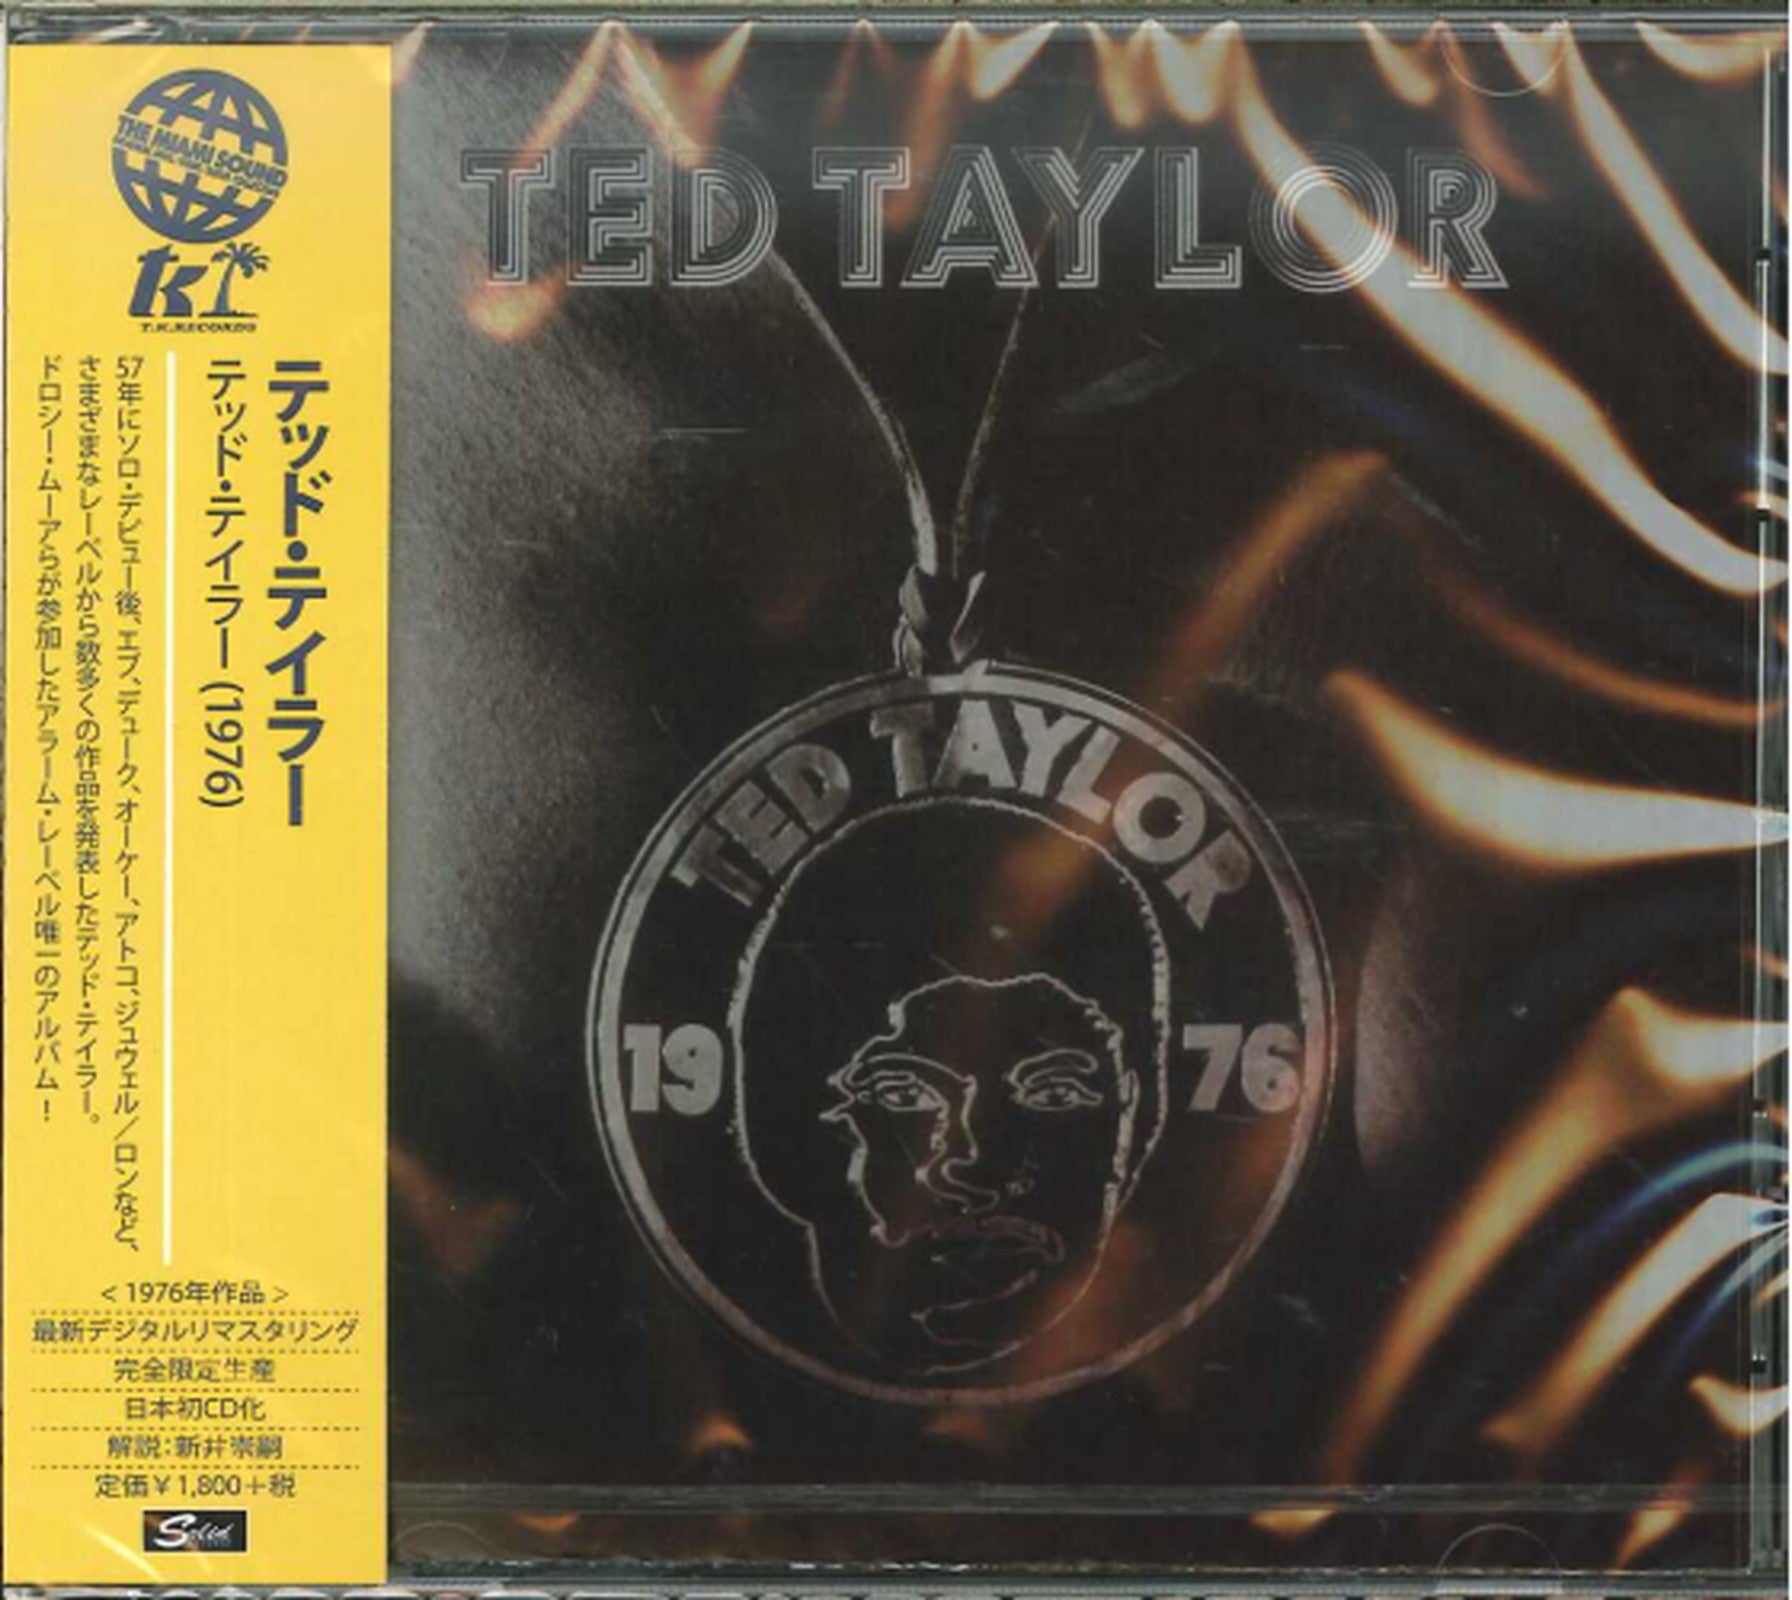 CDs　Japan　CD　Vinyl　Store　Ted　(1976)　Taylor　Taylor　Ted　Japan